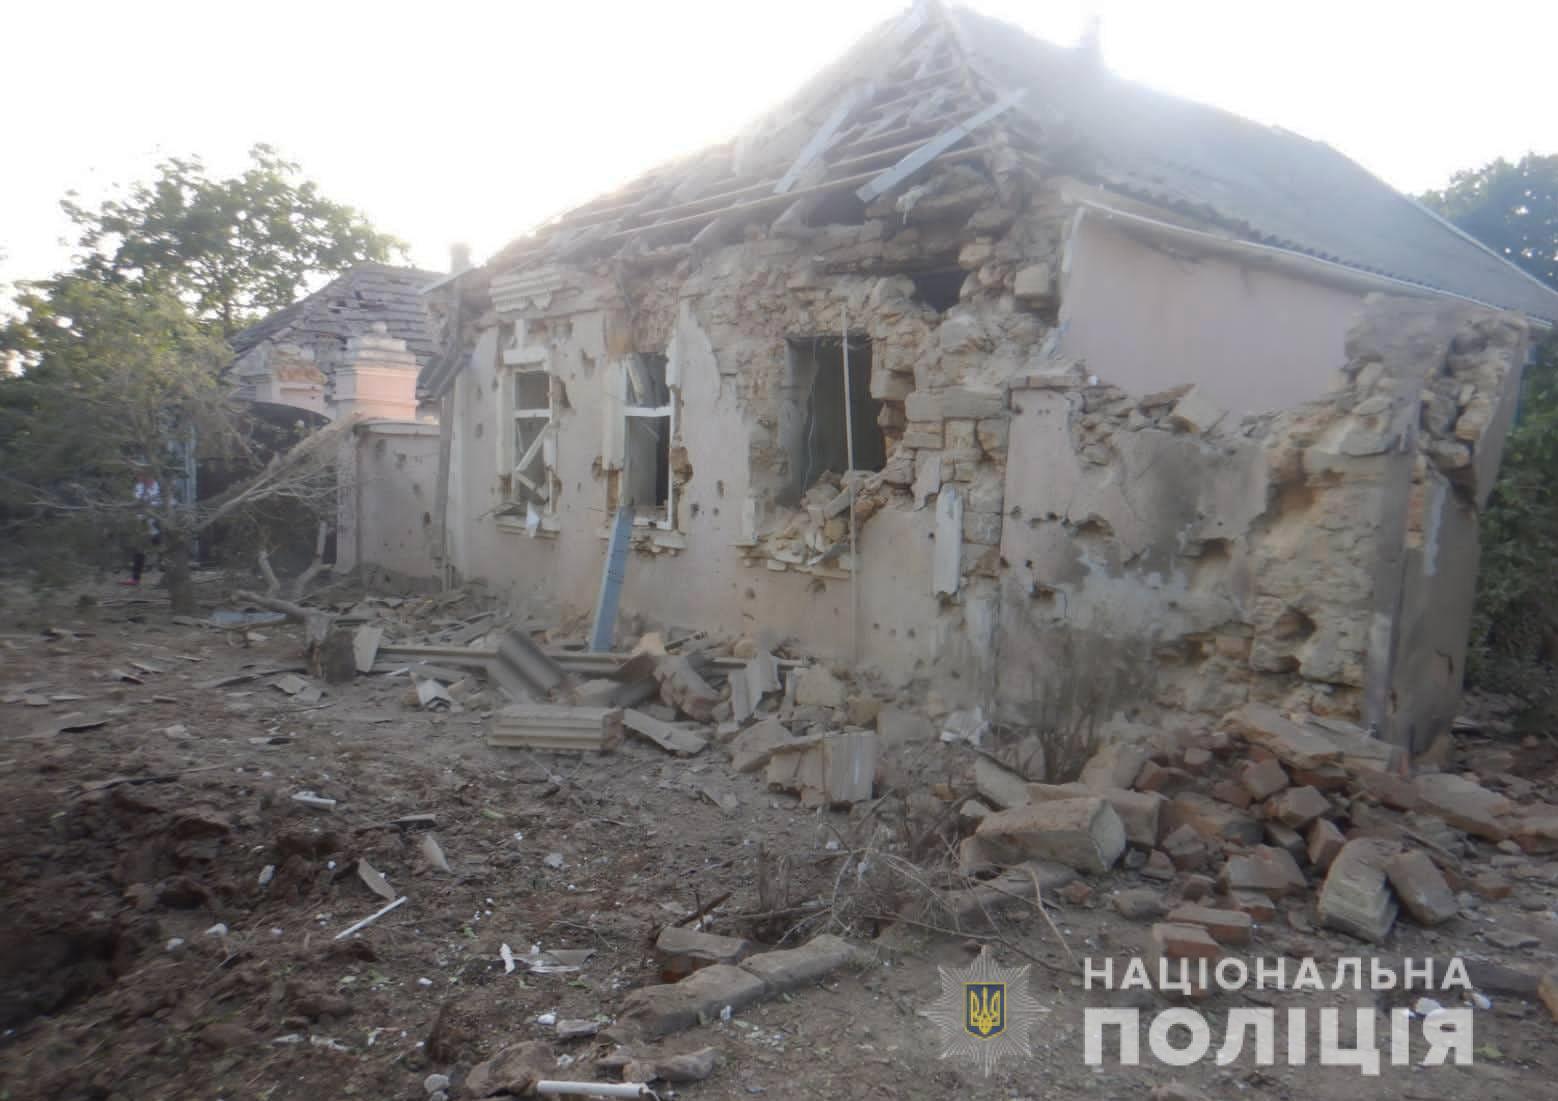 During the day, the enemy destroyed 20 civilian objects of the Mykolaiv region - police officers record crimes of the Russian Federation